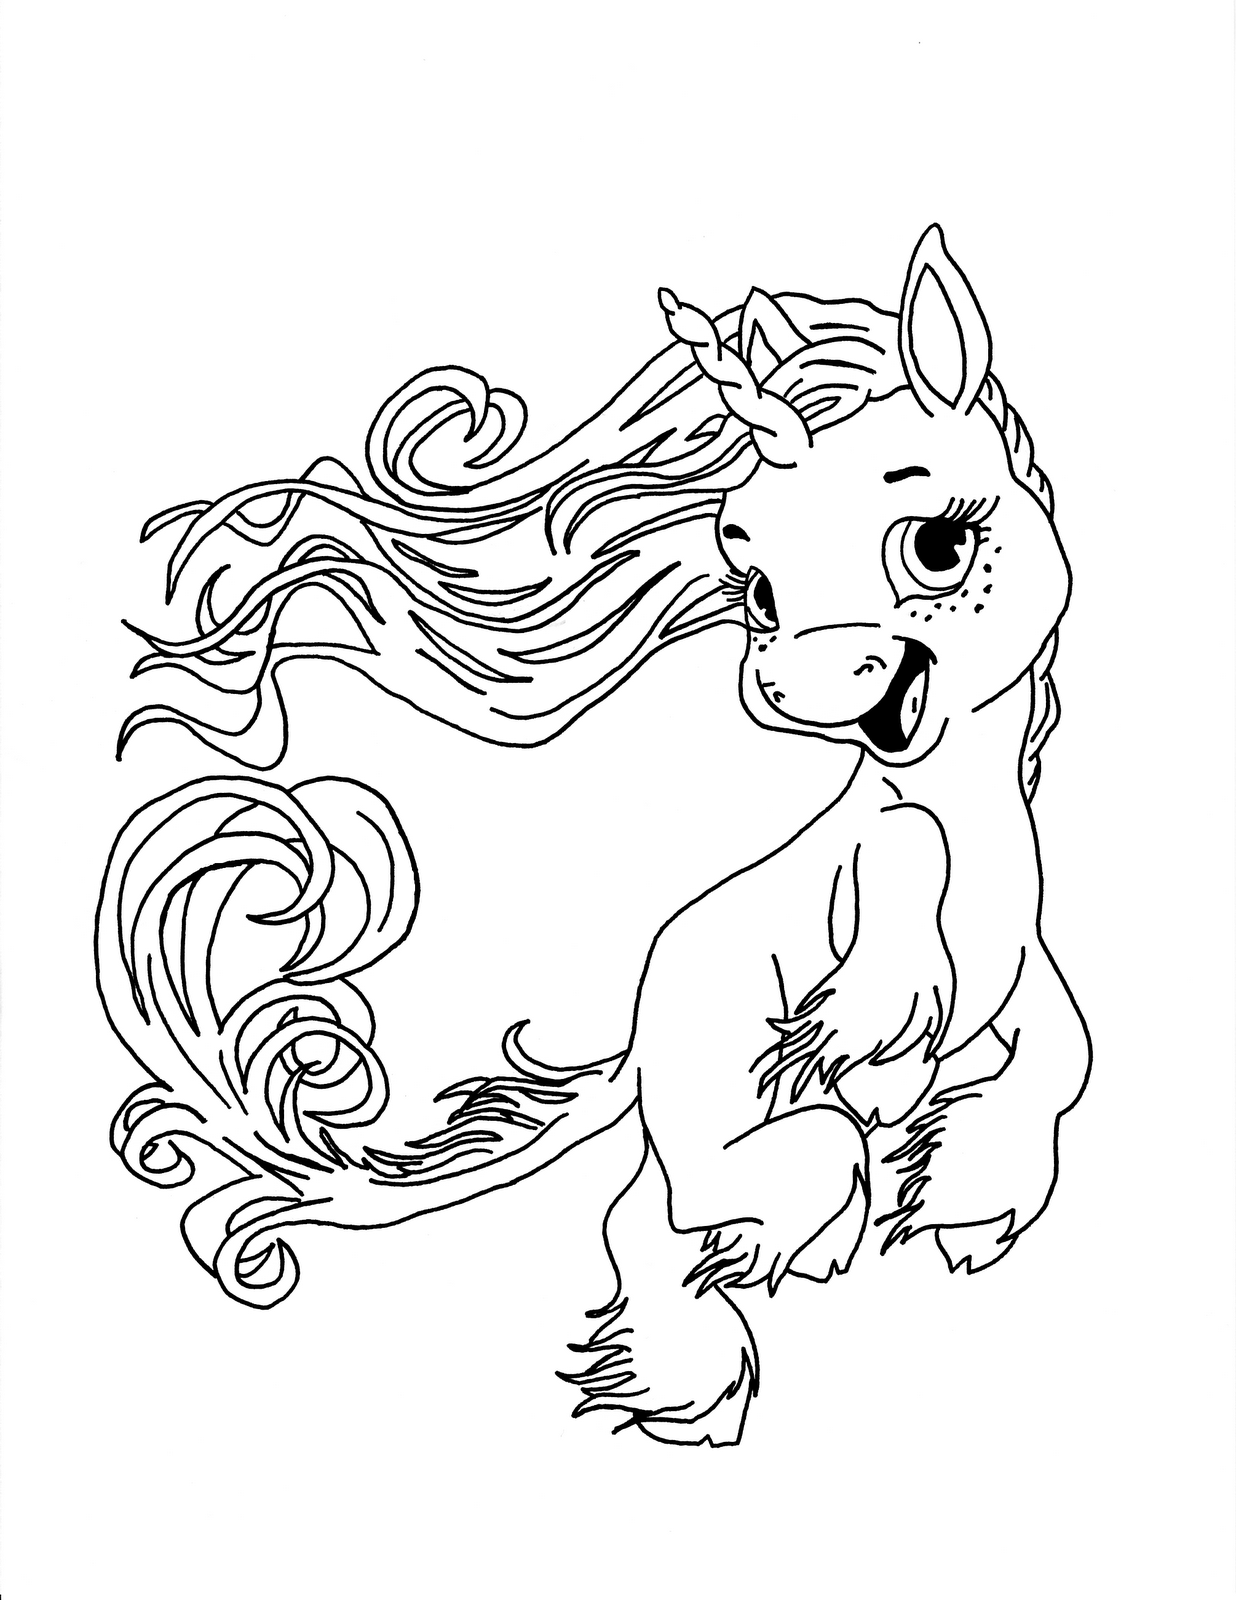 Unicorn Coloring - Coloring Pages for Kids and for Adults